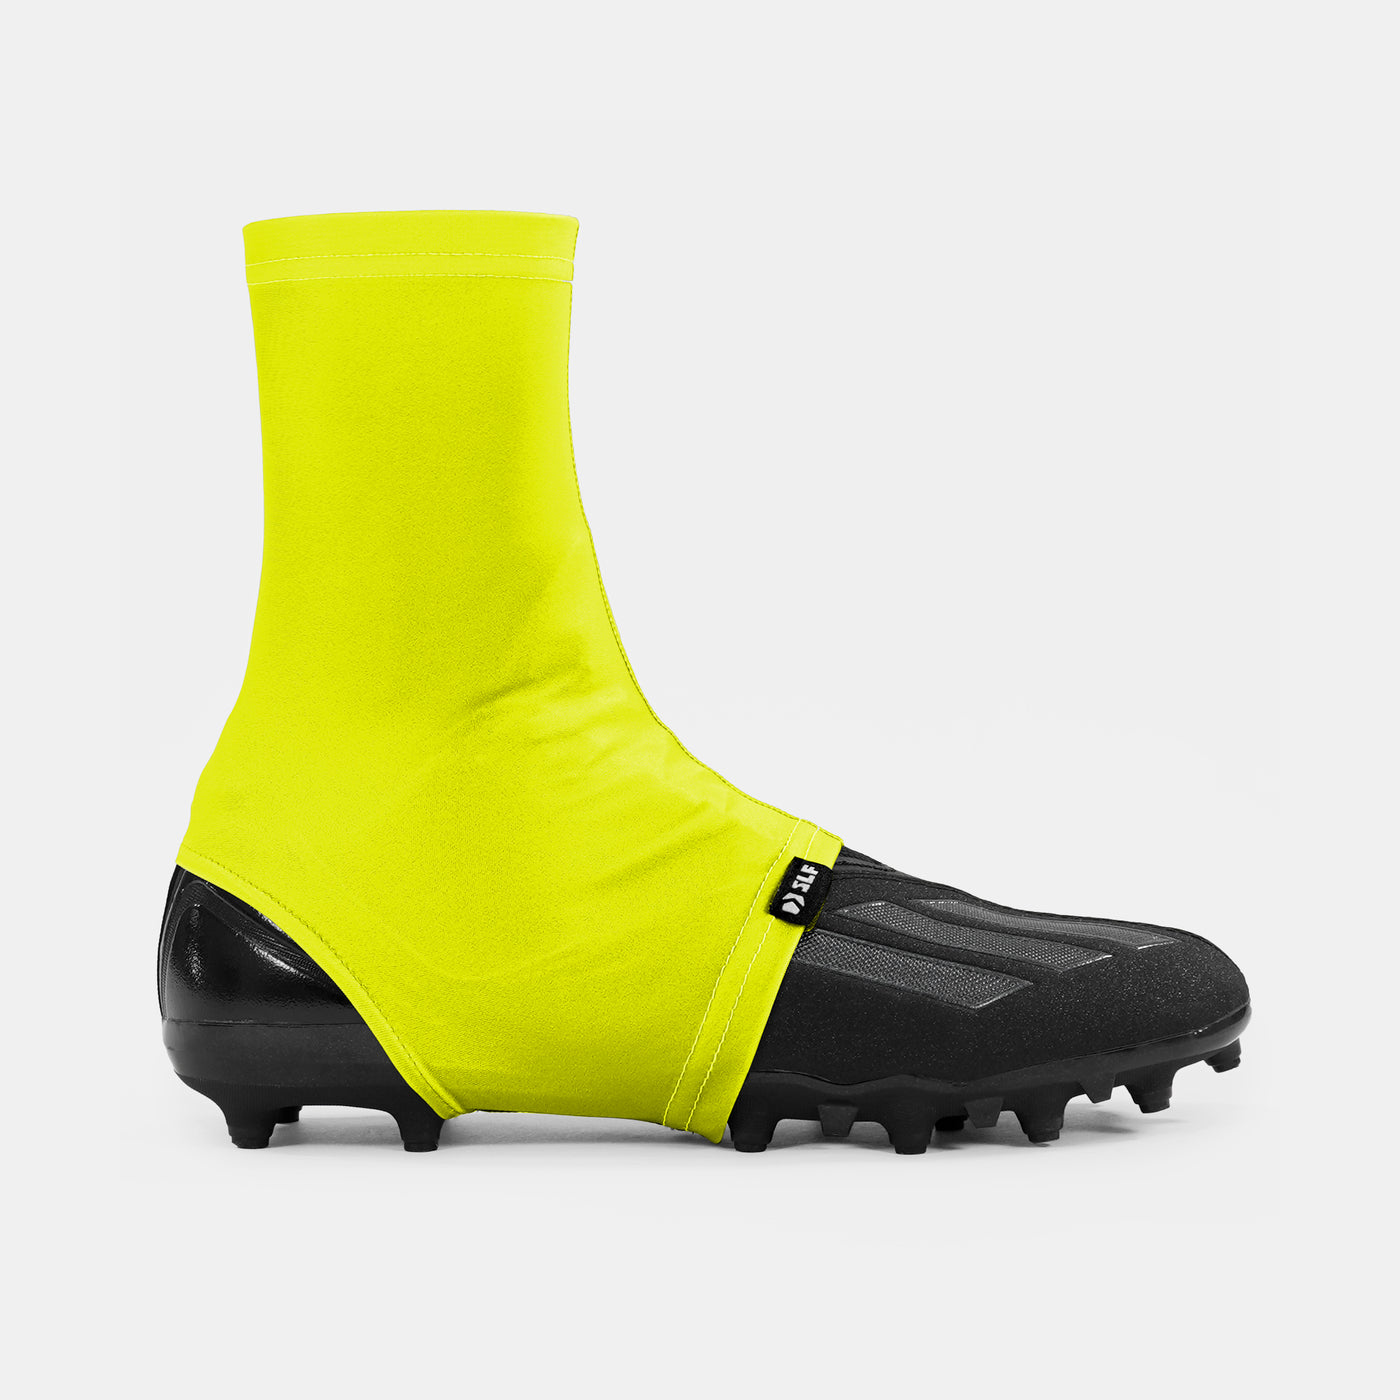 Hue Lemon Yellow Spats / Cleat Covers